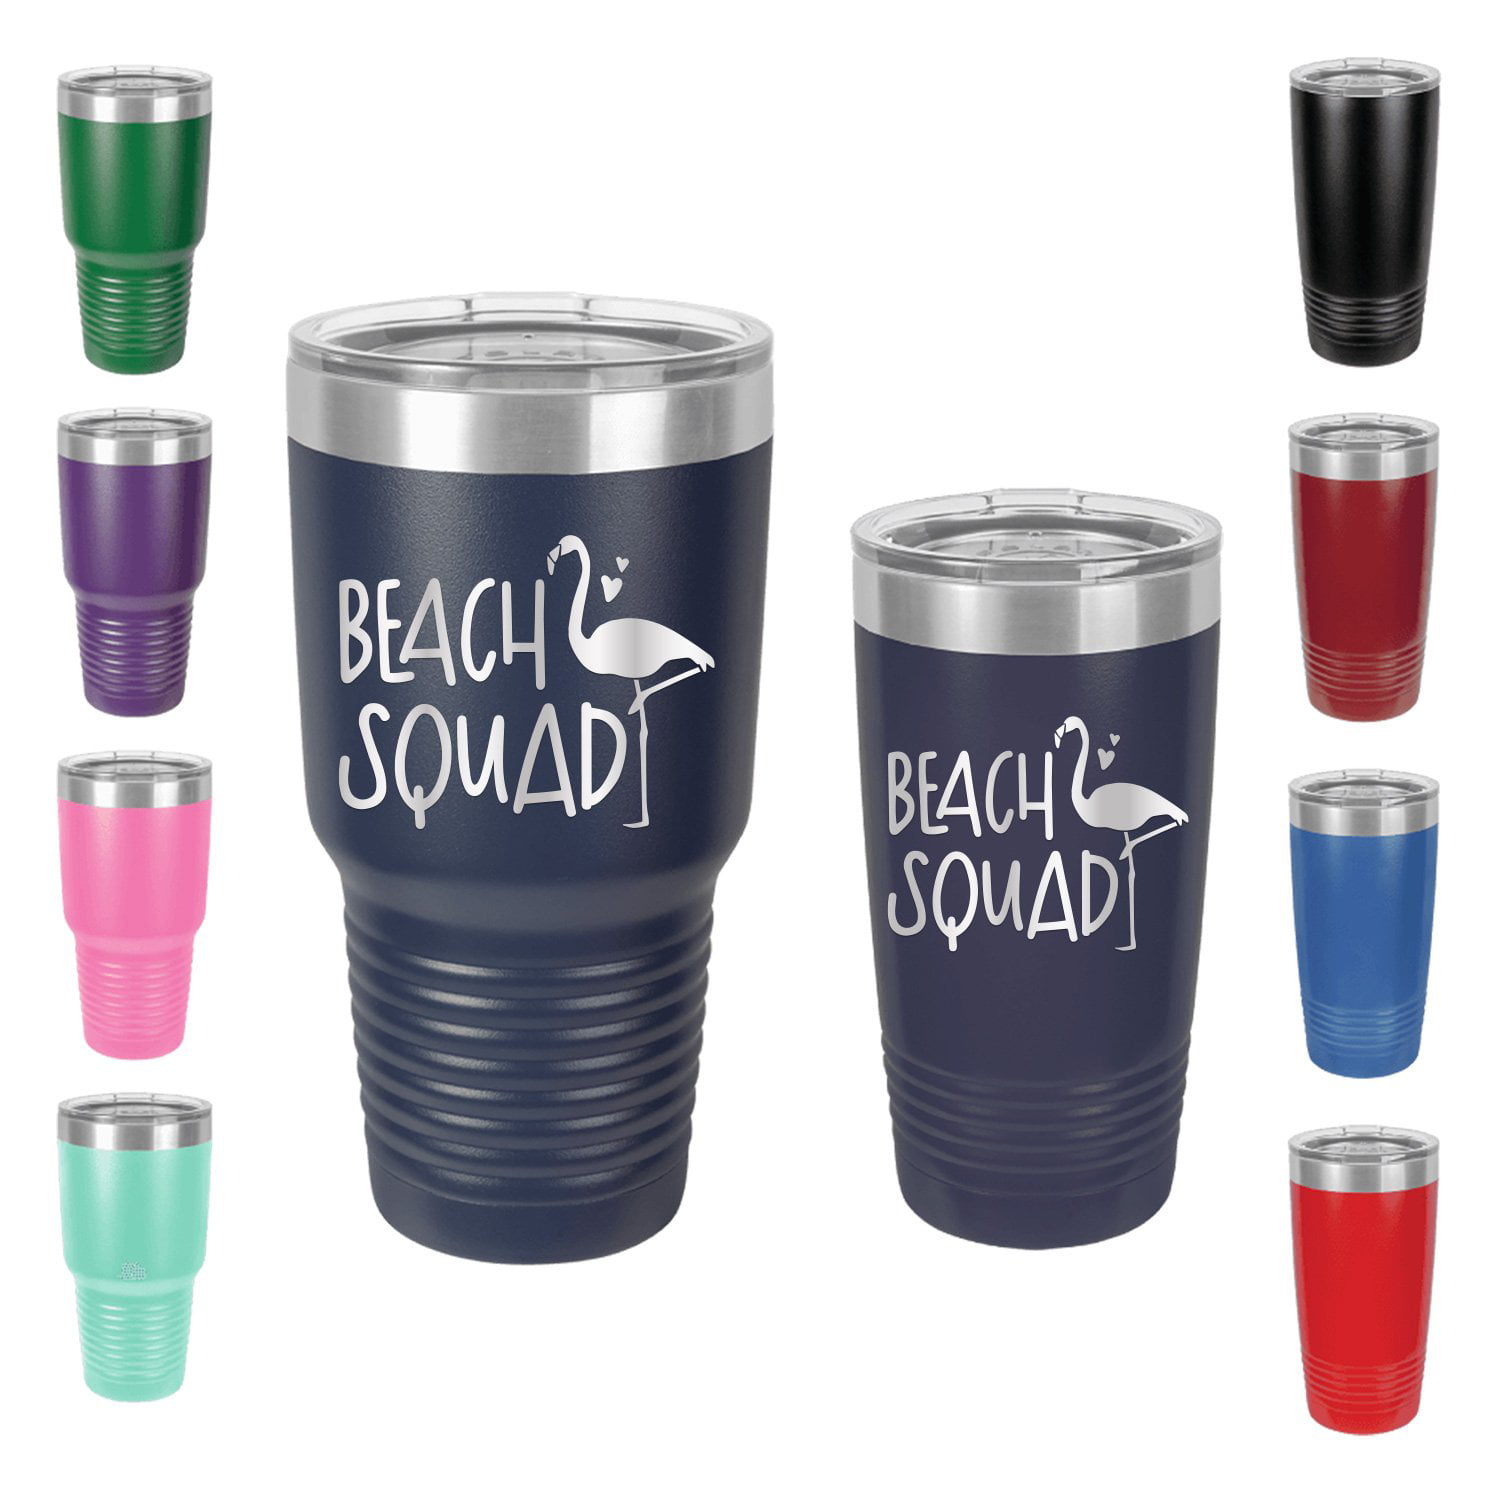 Personalized Gift for him Tumbler Boating Cup Anchor Gift Insulated Tumbler Ship Captain Gift Engraved Cup Custom Tumbler Cup Christmas Gift